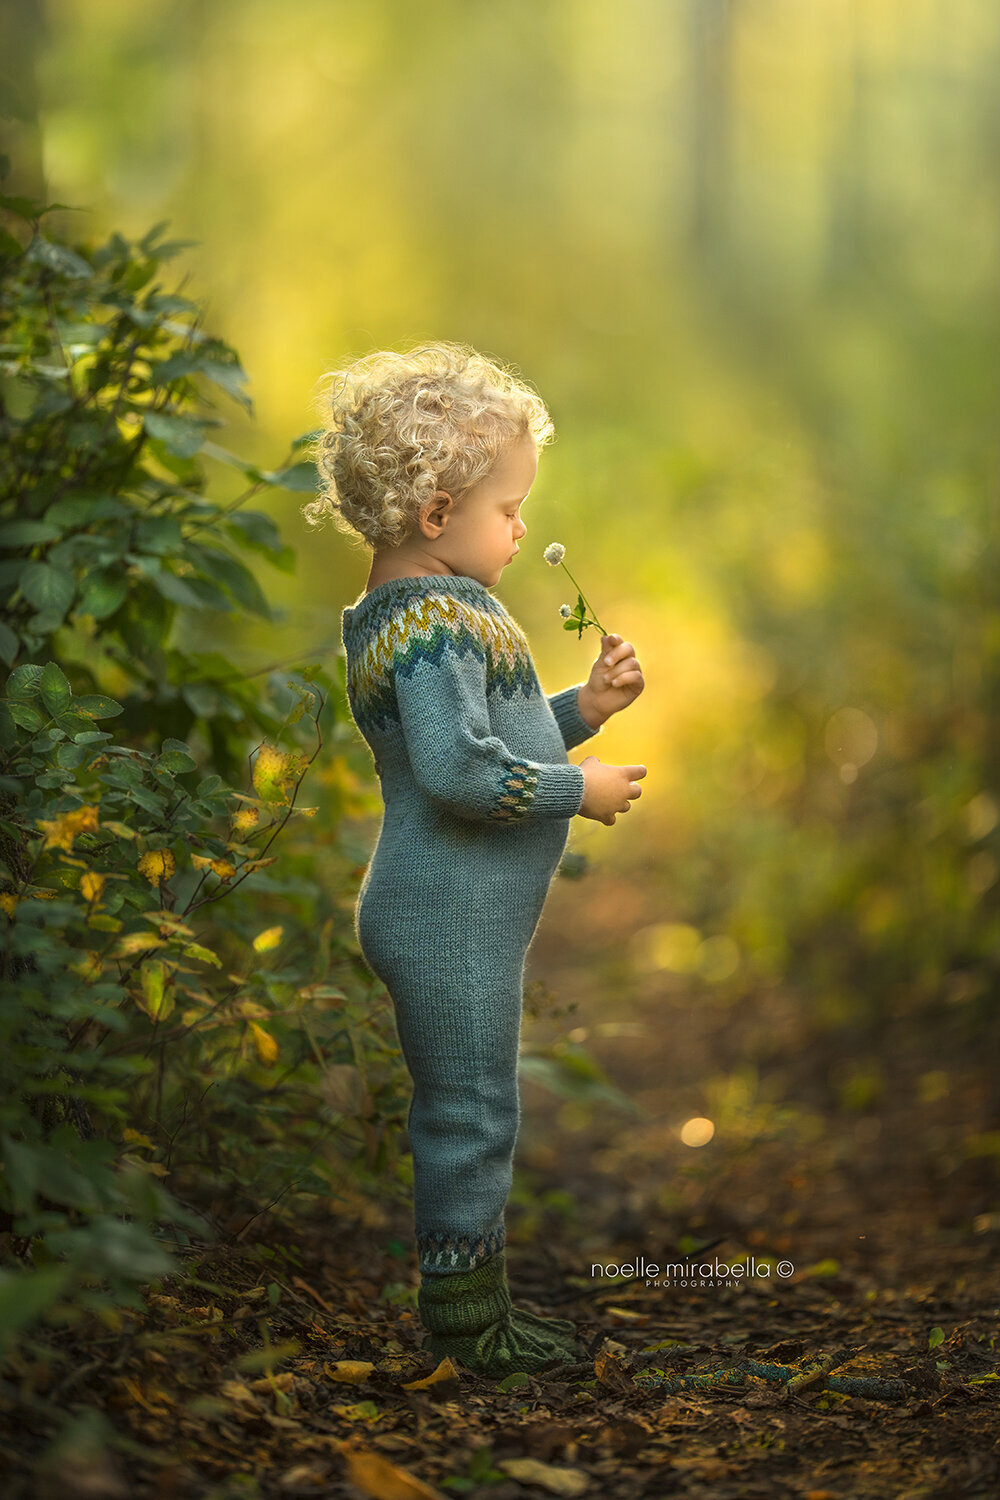 Child smelling clover outside on a forest trail in the sunlight.